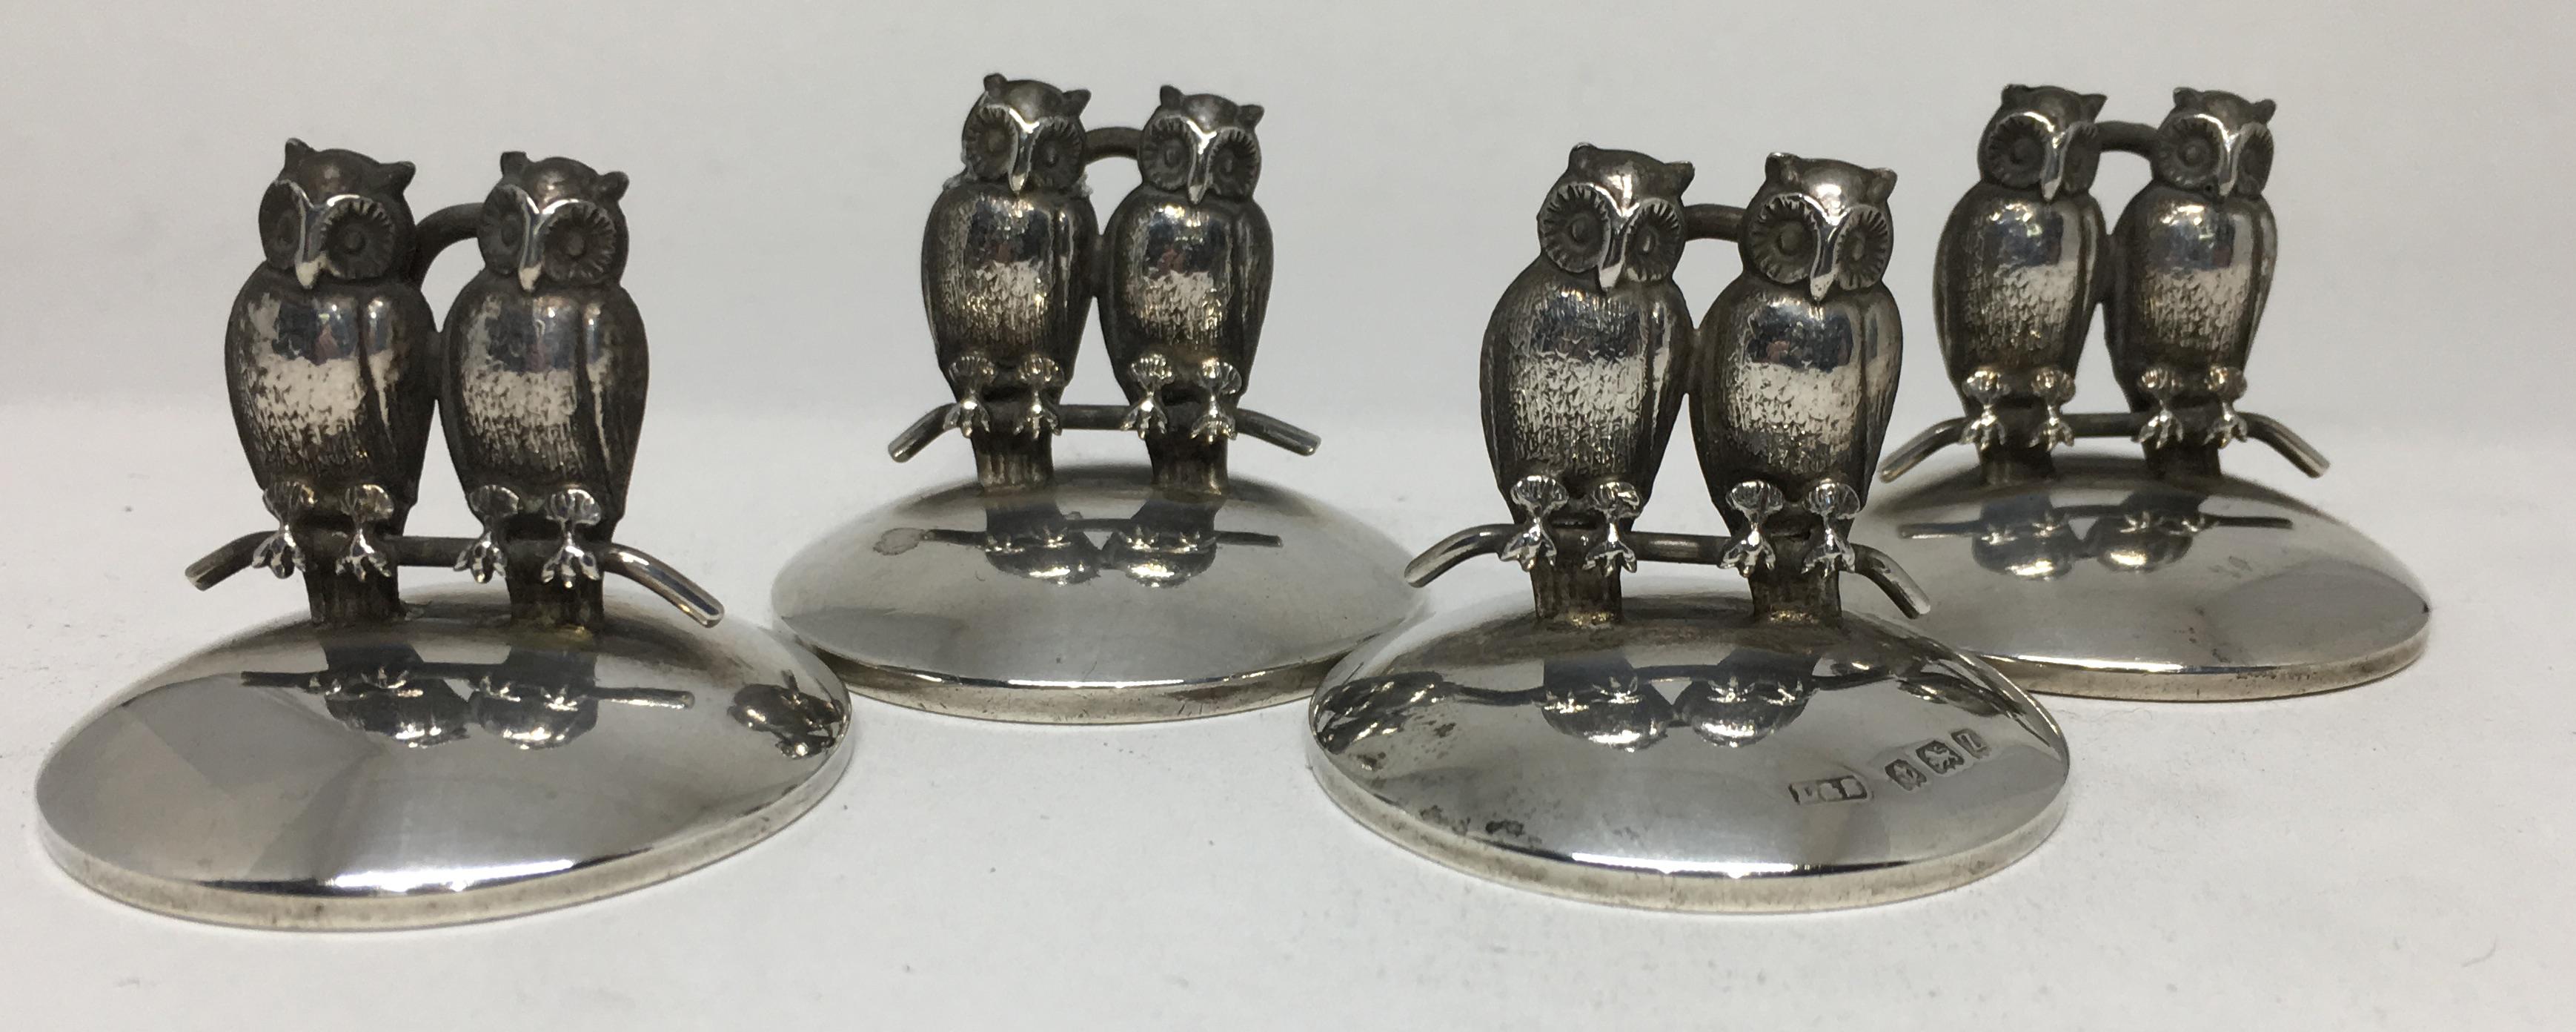 A rare set of four place card holders / menu holders. Each featuring two owls sitting upon a branch.

By Levi & Salamon and dated for Birmingham, 1924.

Each piece measures 1 1/4 inches high.